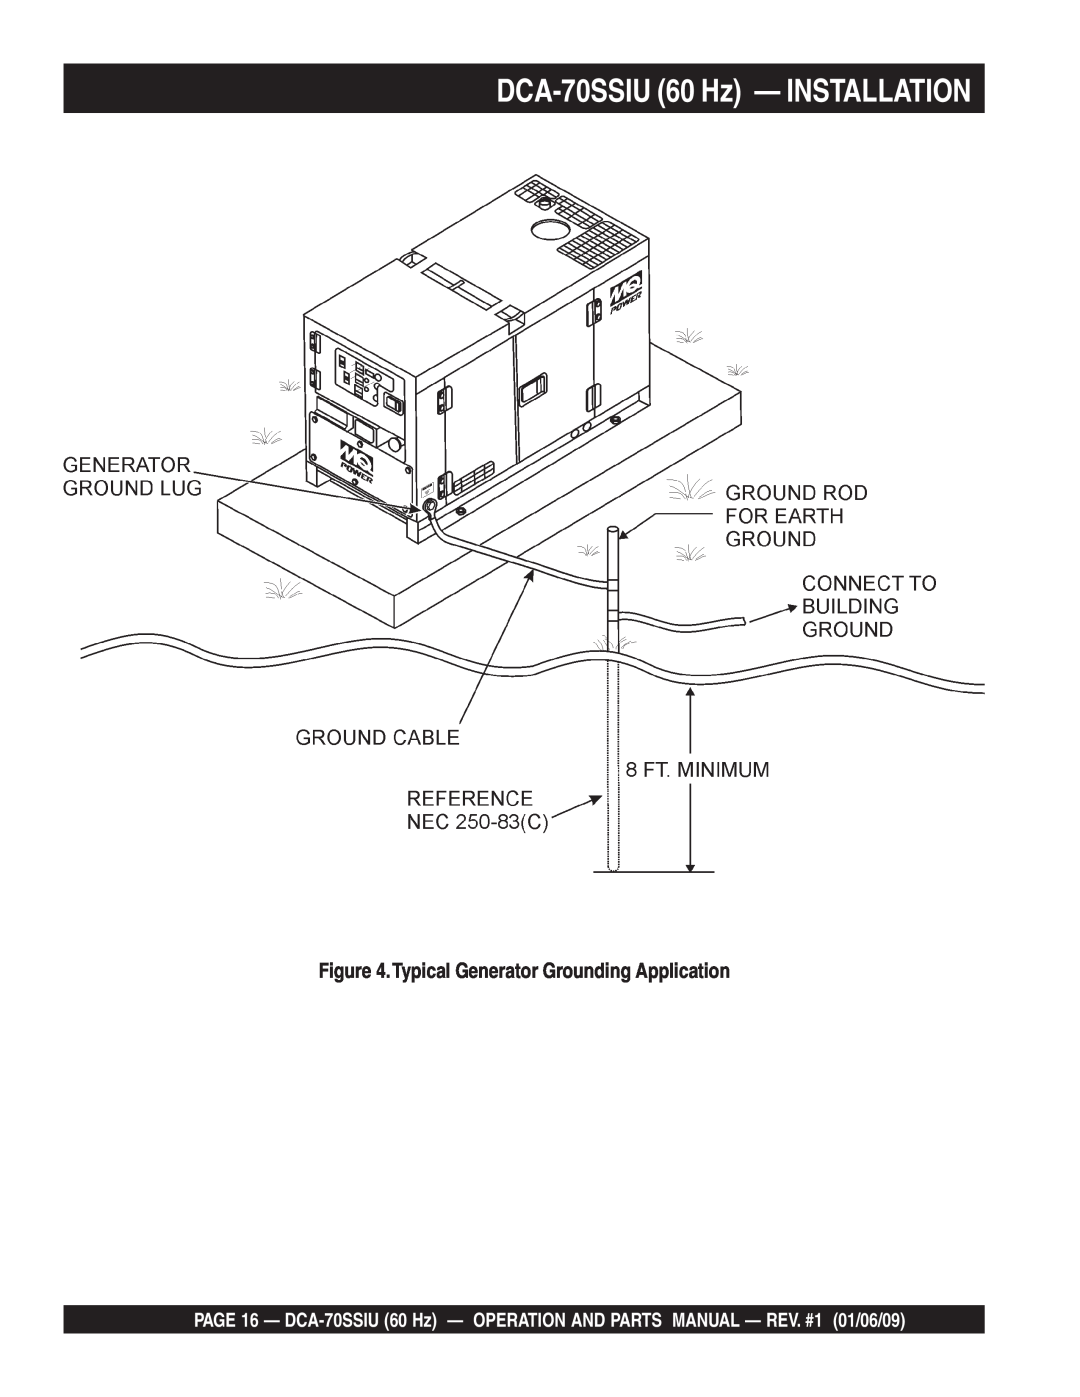 Multiquip M2870300504 operation manual DCA-70SSIU 60 Hz - INSTALLATION, Typical Generator Grounding Application 